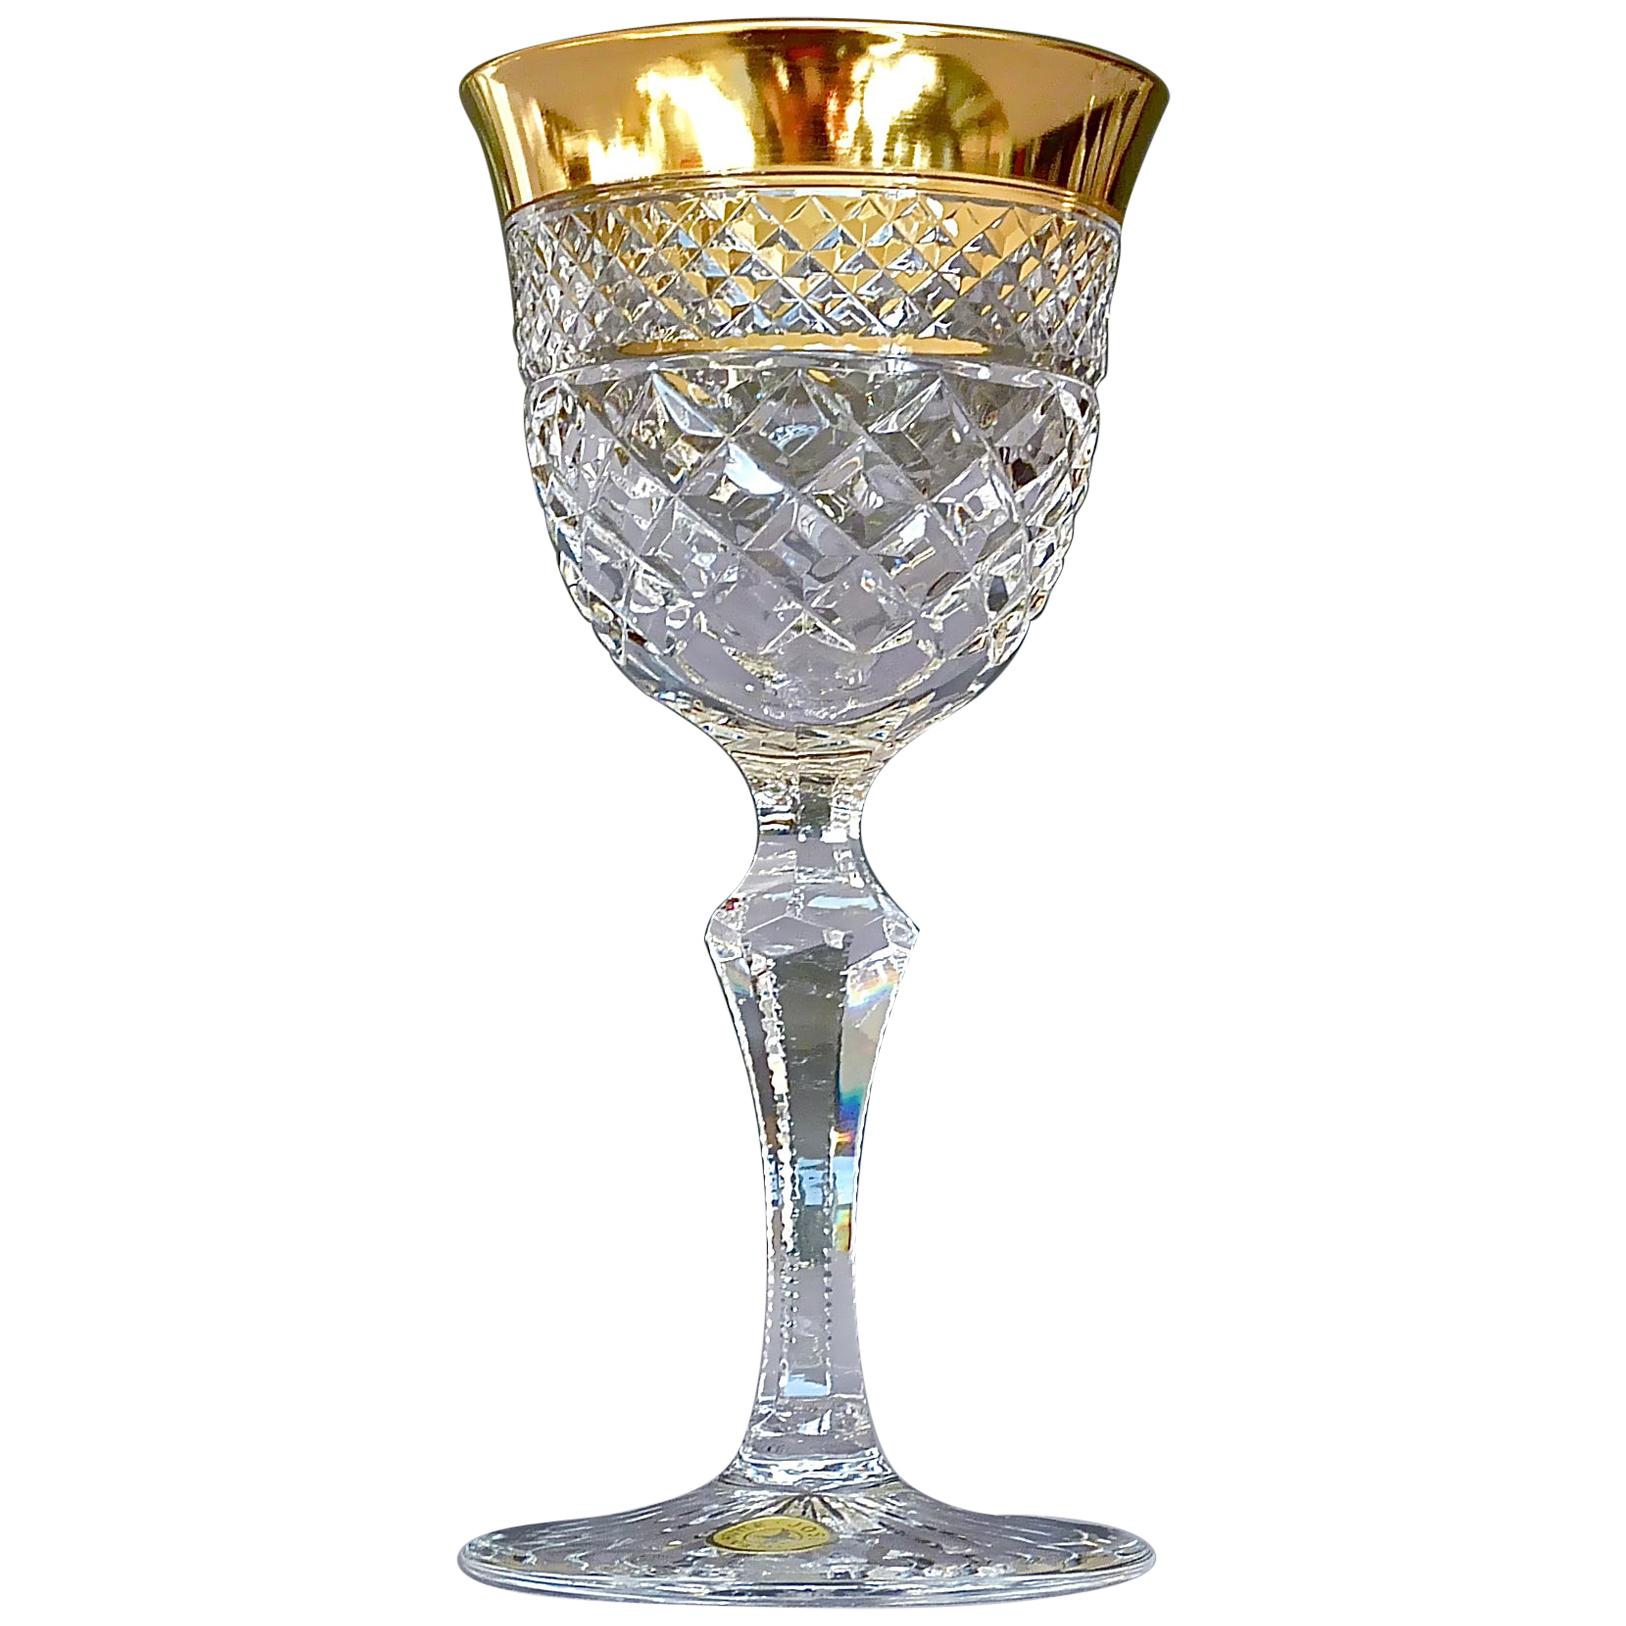 Gorgeous 20th century handcrafted faceted crystal glass set with 24-carat gold rim made by Josephinenhütte Moser circa 1960-1970 and very in the style of the exclusive French company Baccarat or Saint Louis thistle. This exquisite set of 6 dessert